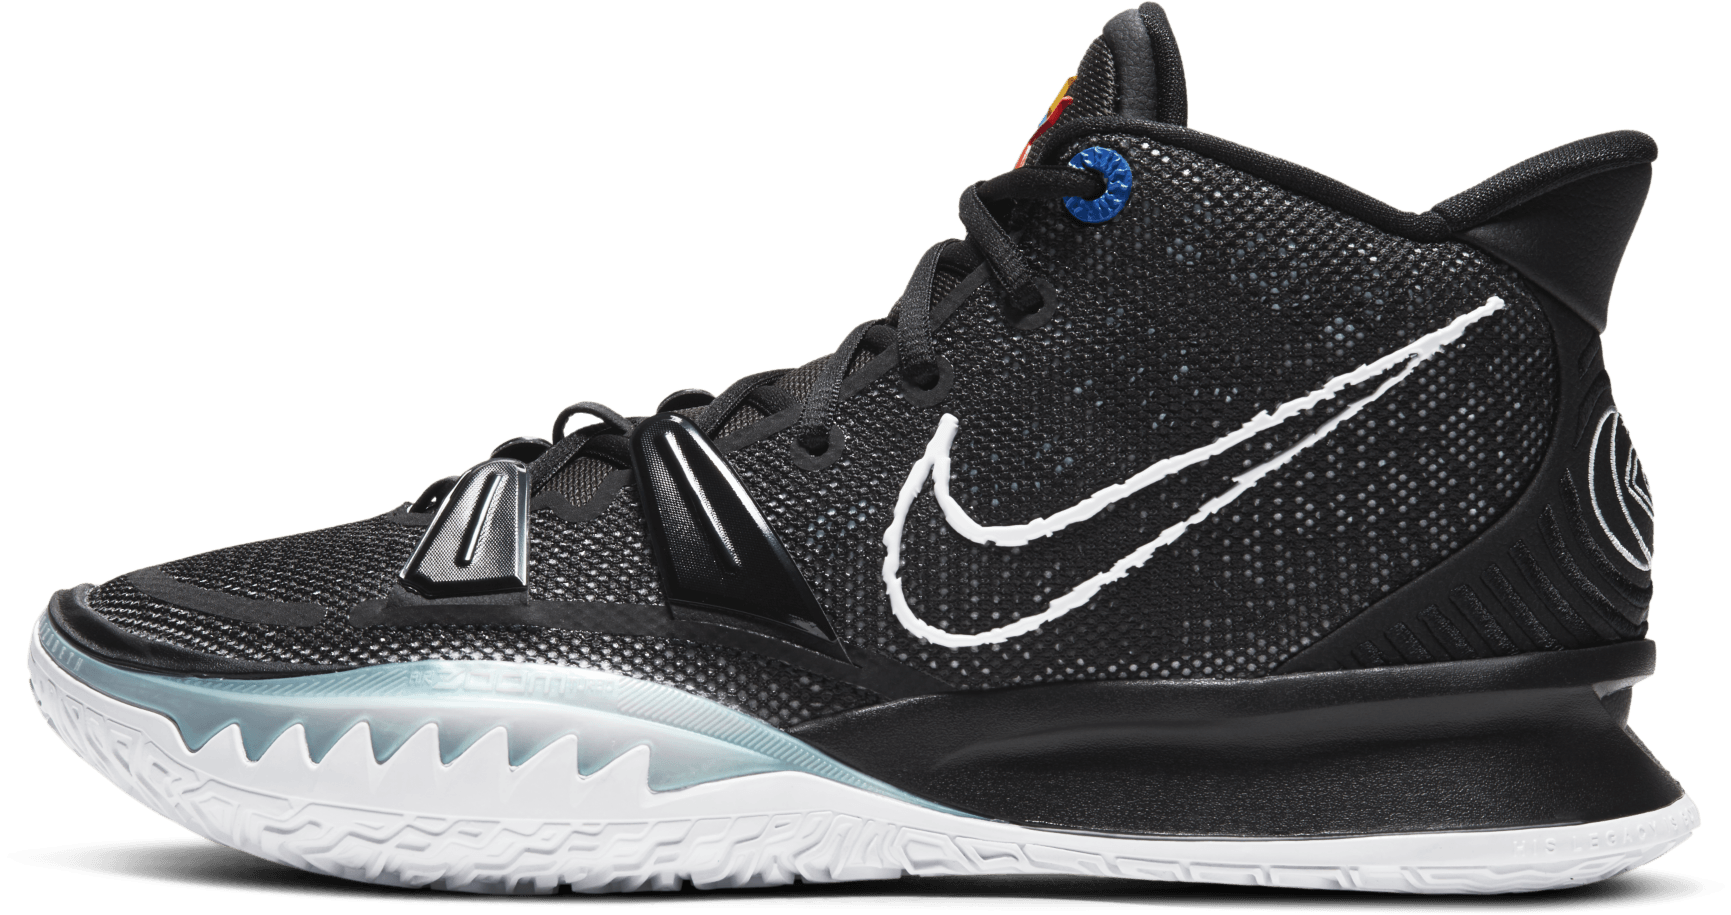 kyrie irving shoes review